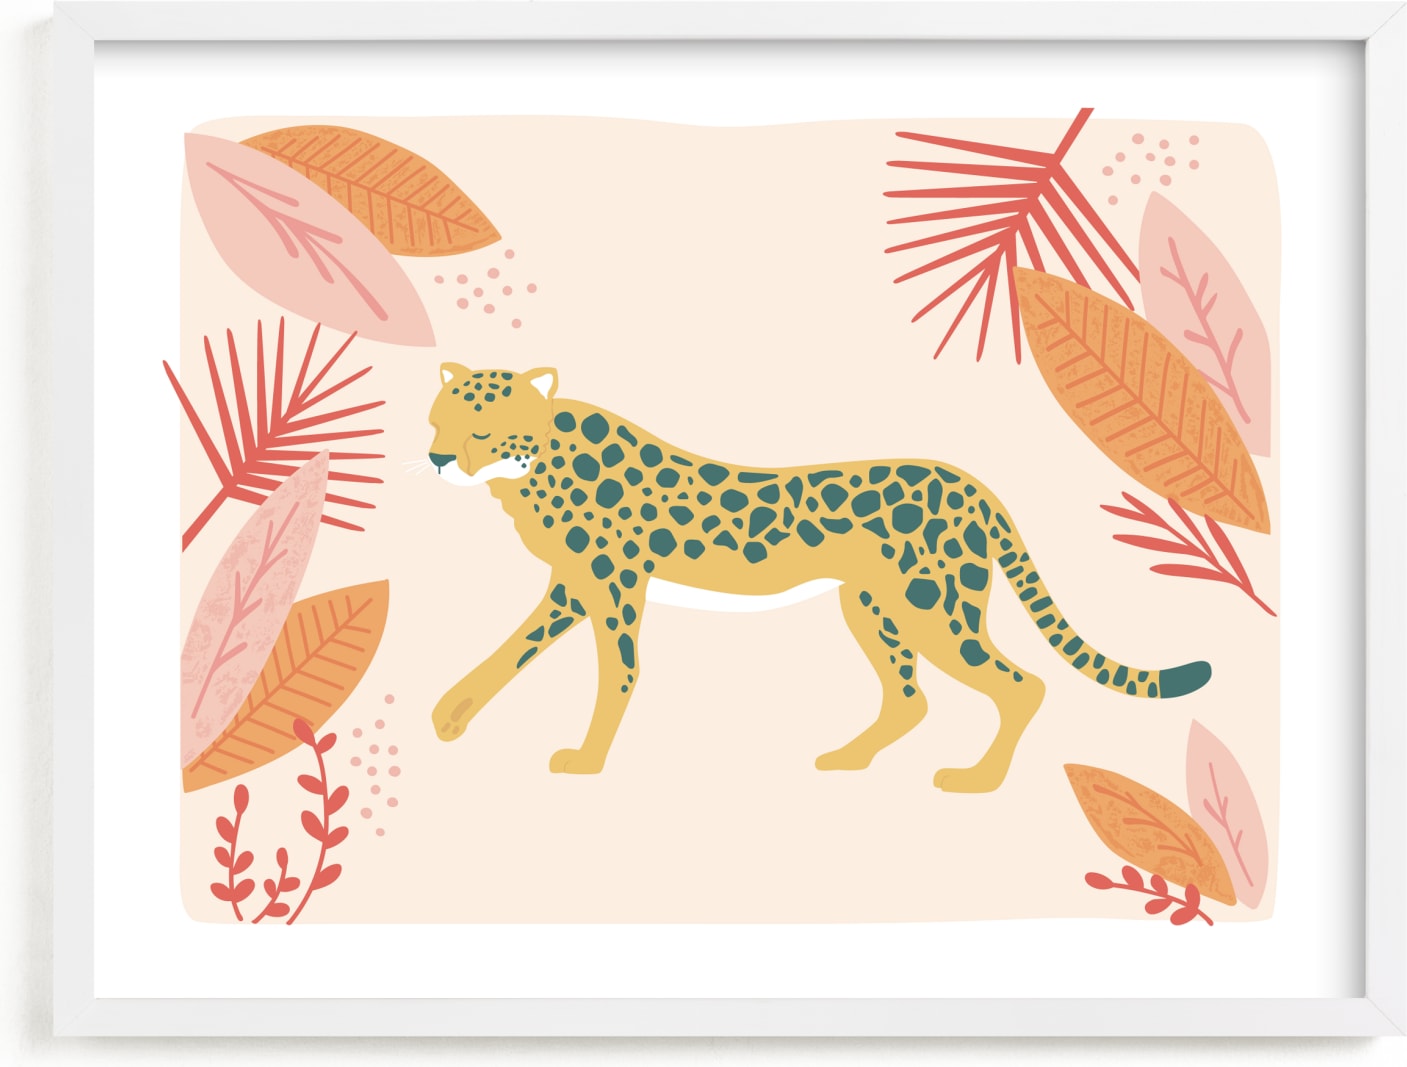 This is a pink kids wall art by peetie design called speedy cheetah.